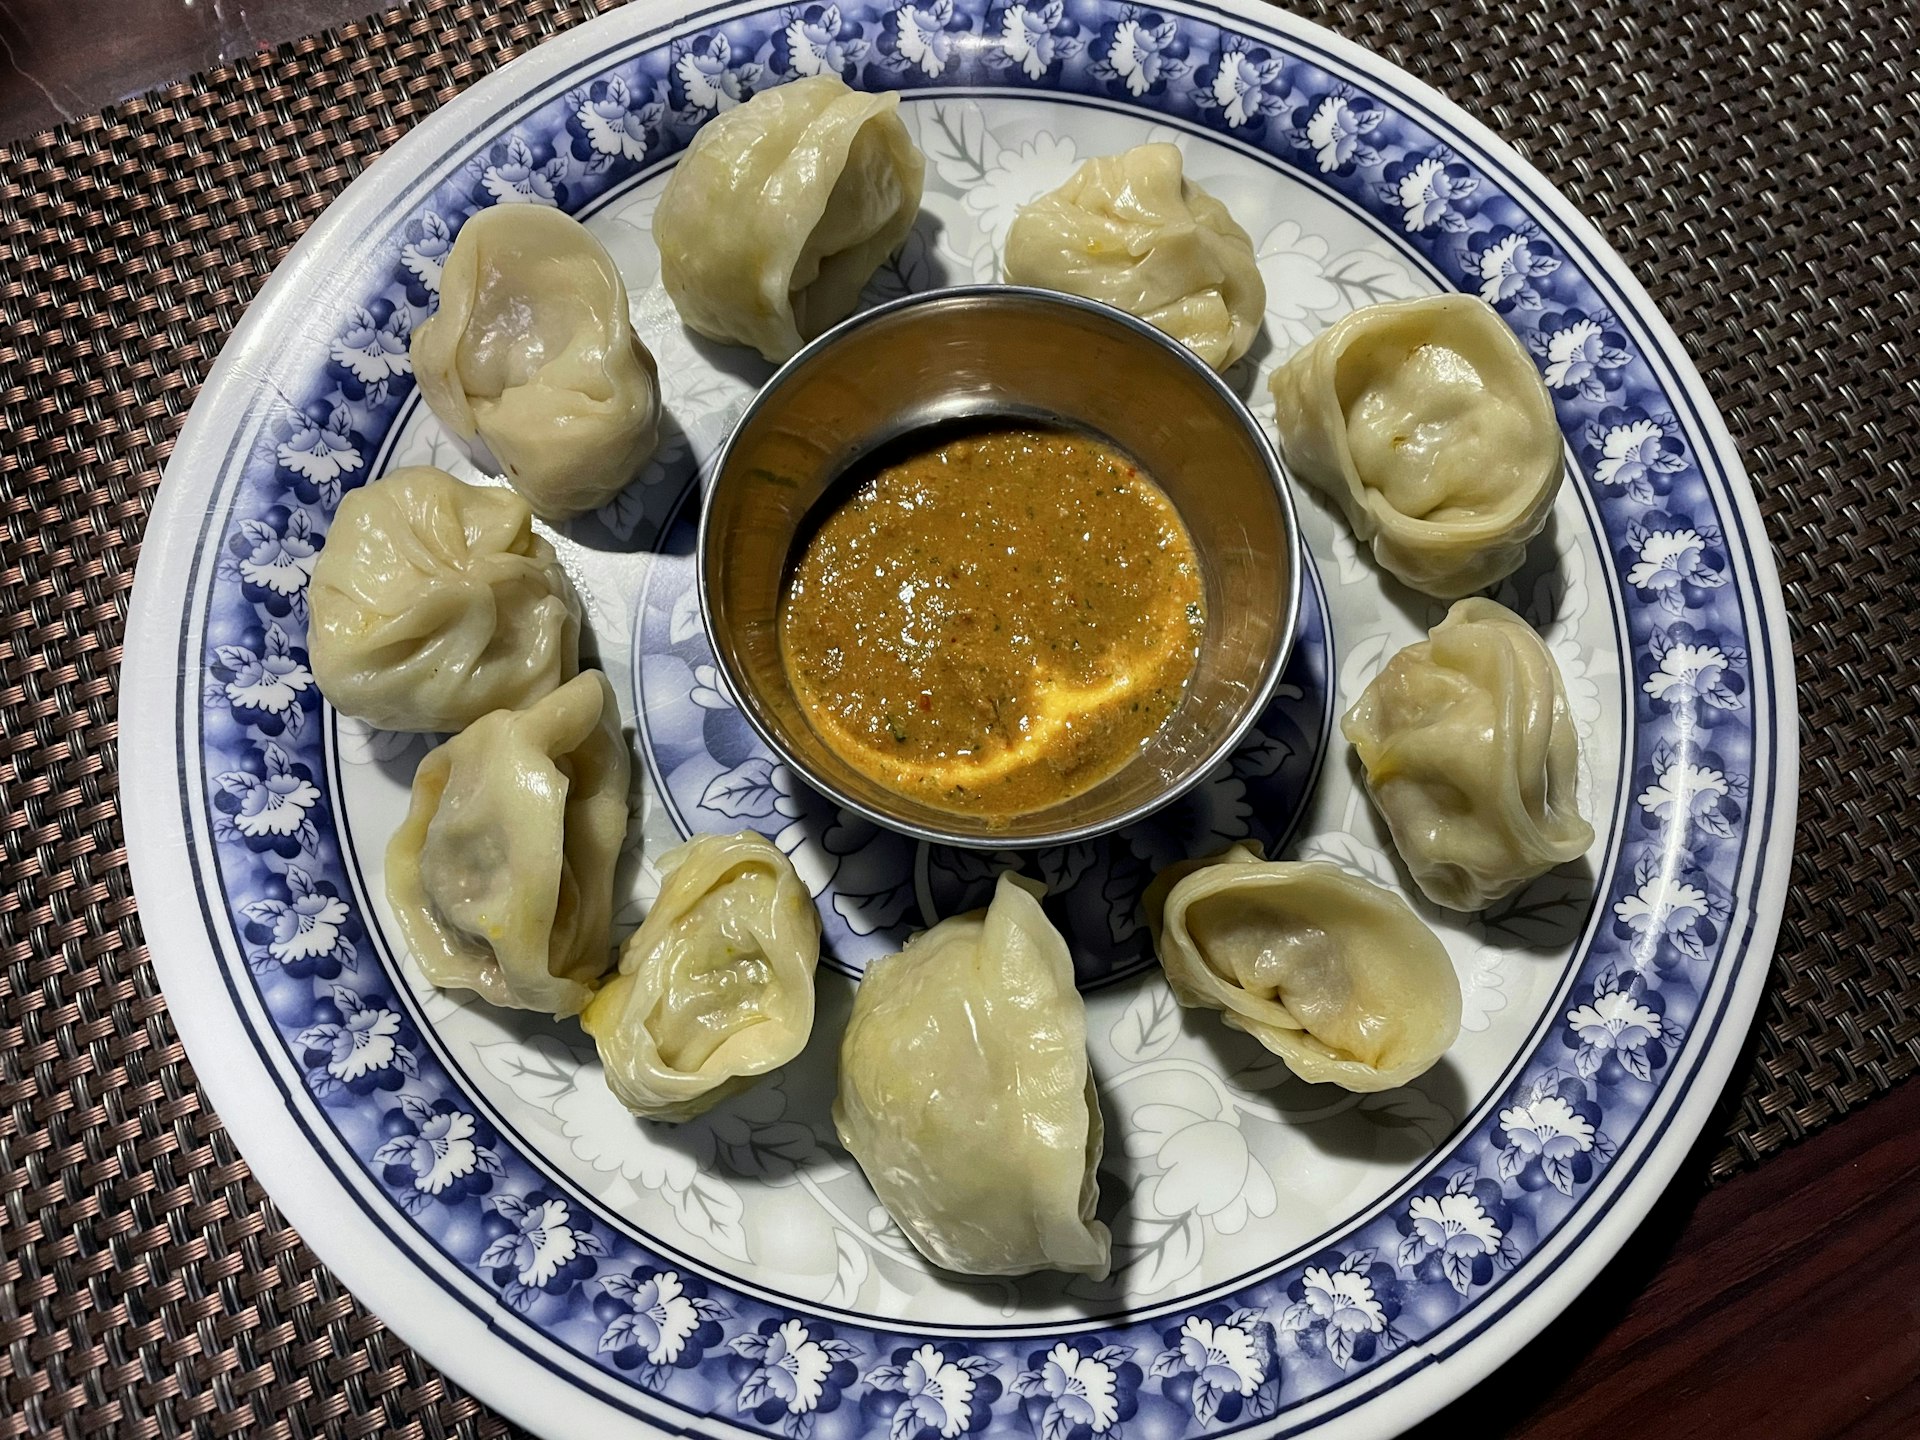 A dish with small white dumplings surrounding a bowl of dip